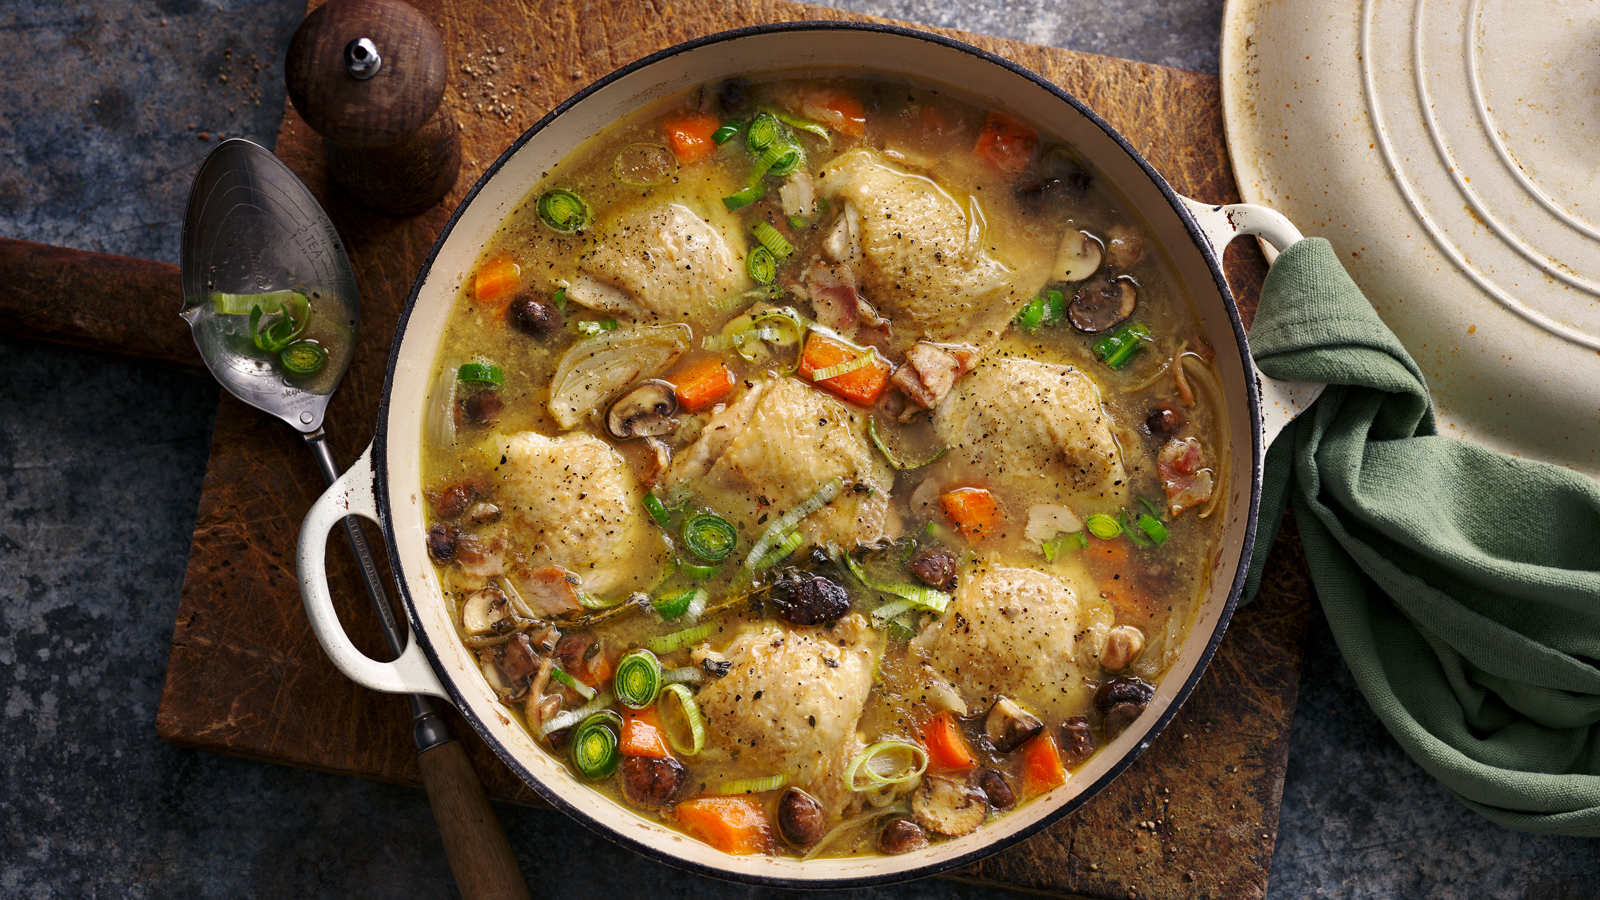 https://food-images.files.bbci.co.uk/food/recipes/chickencasserole_85719_16x9.jpg